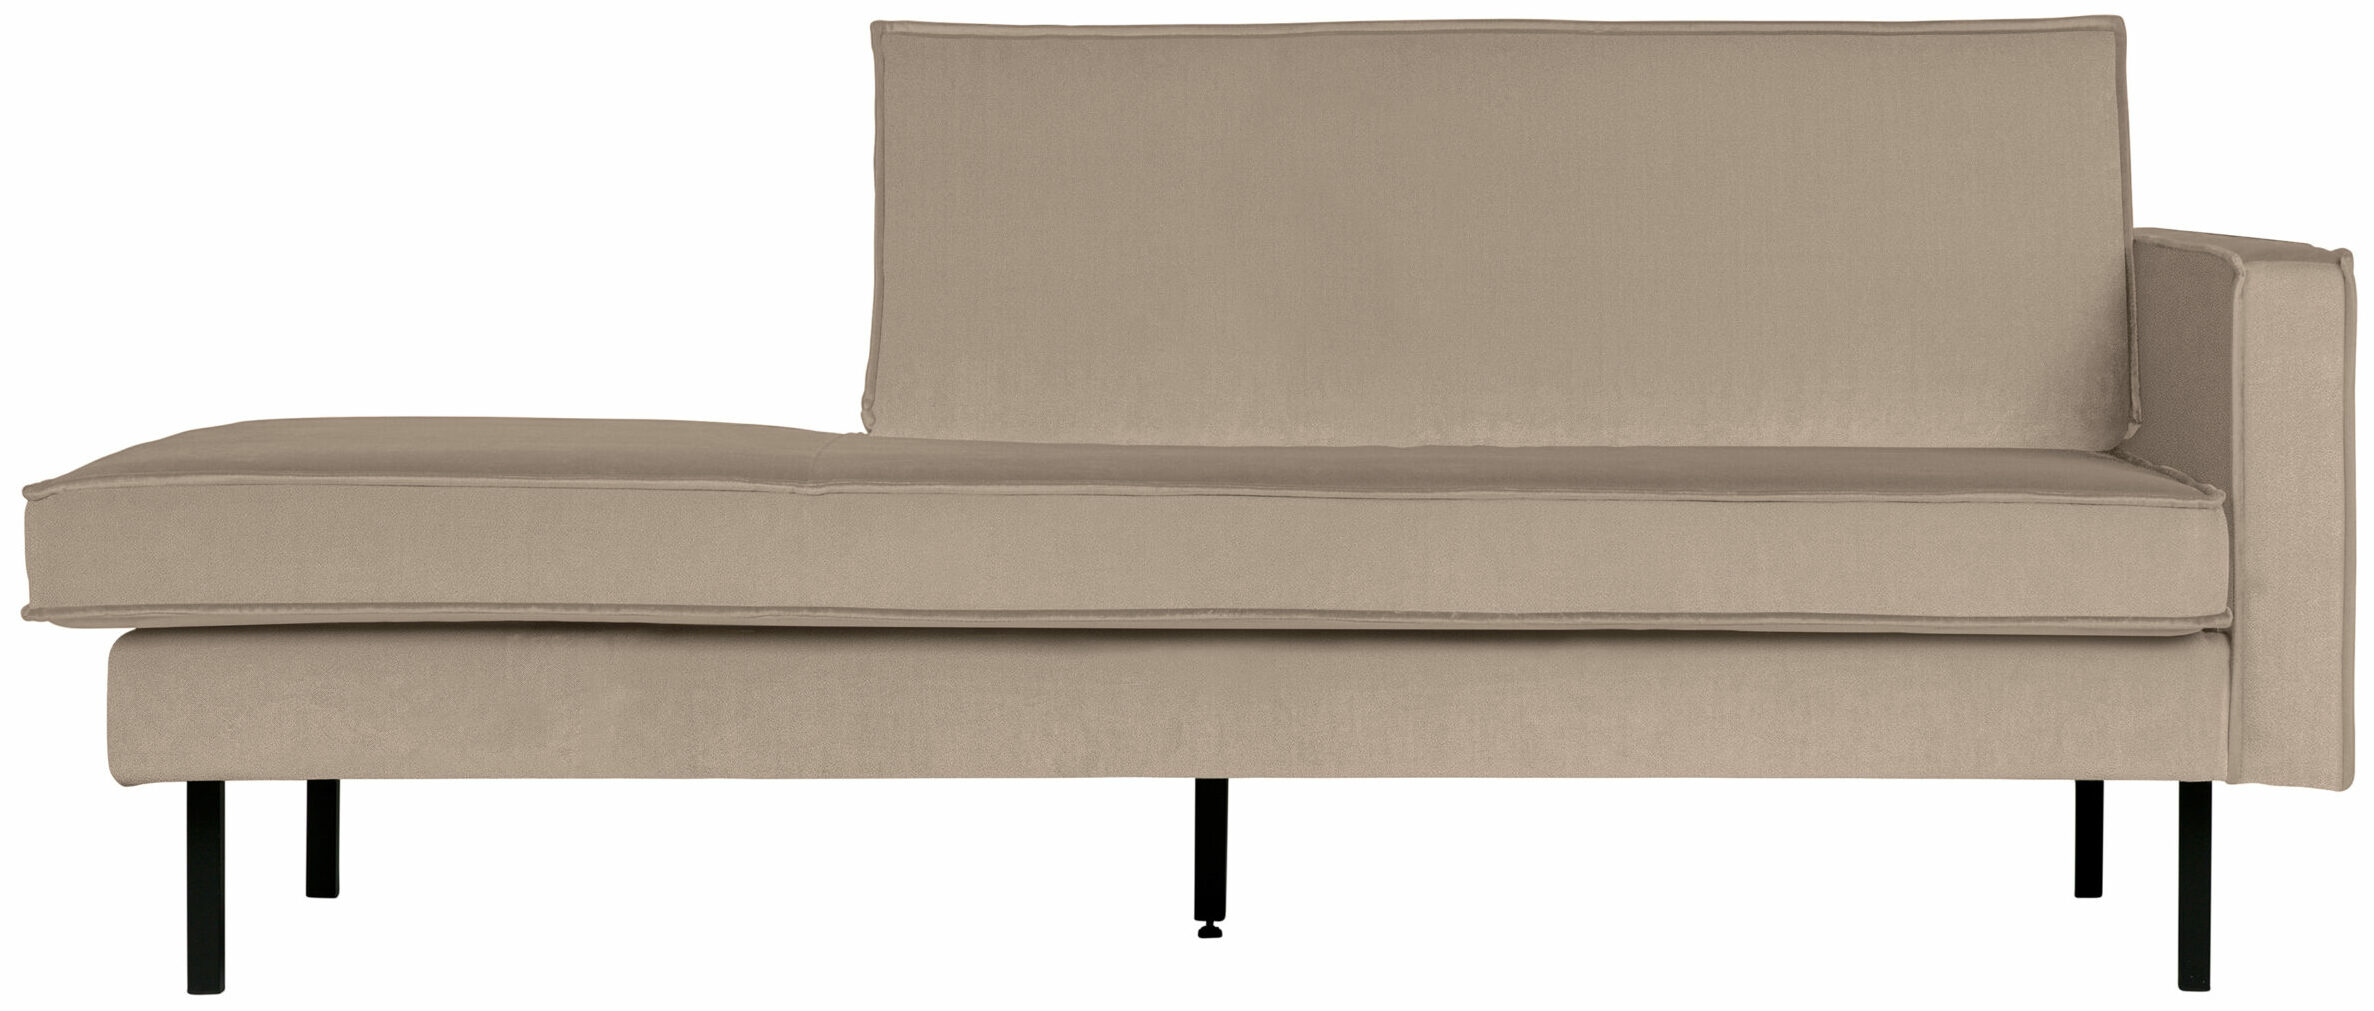 BePureHome Rodeo Daybed Right Velvet Khaki Beige|Taupe